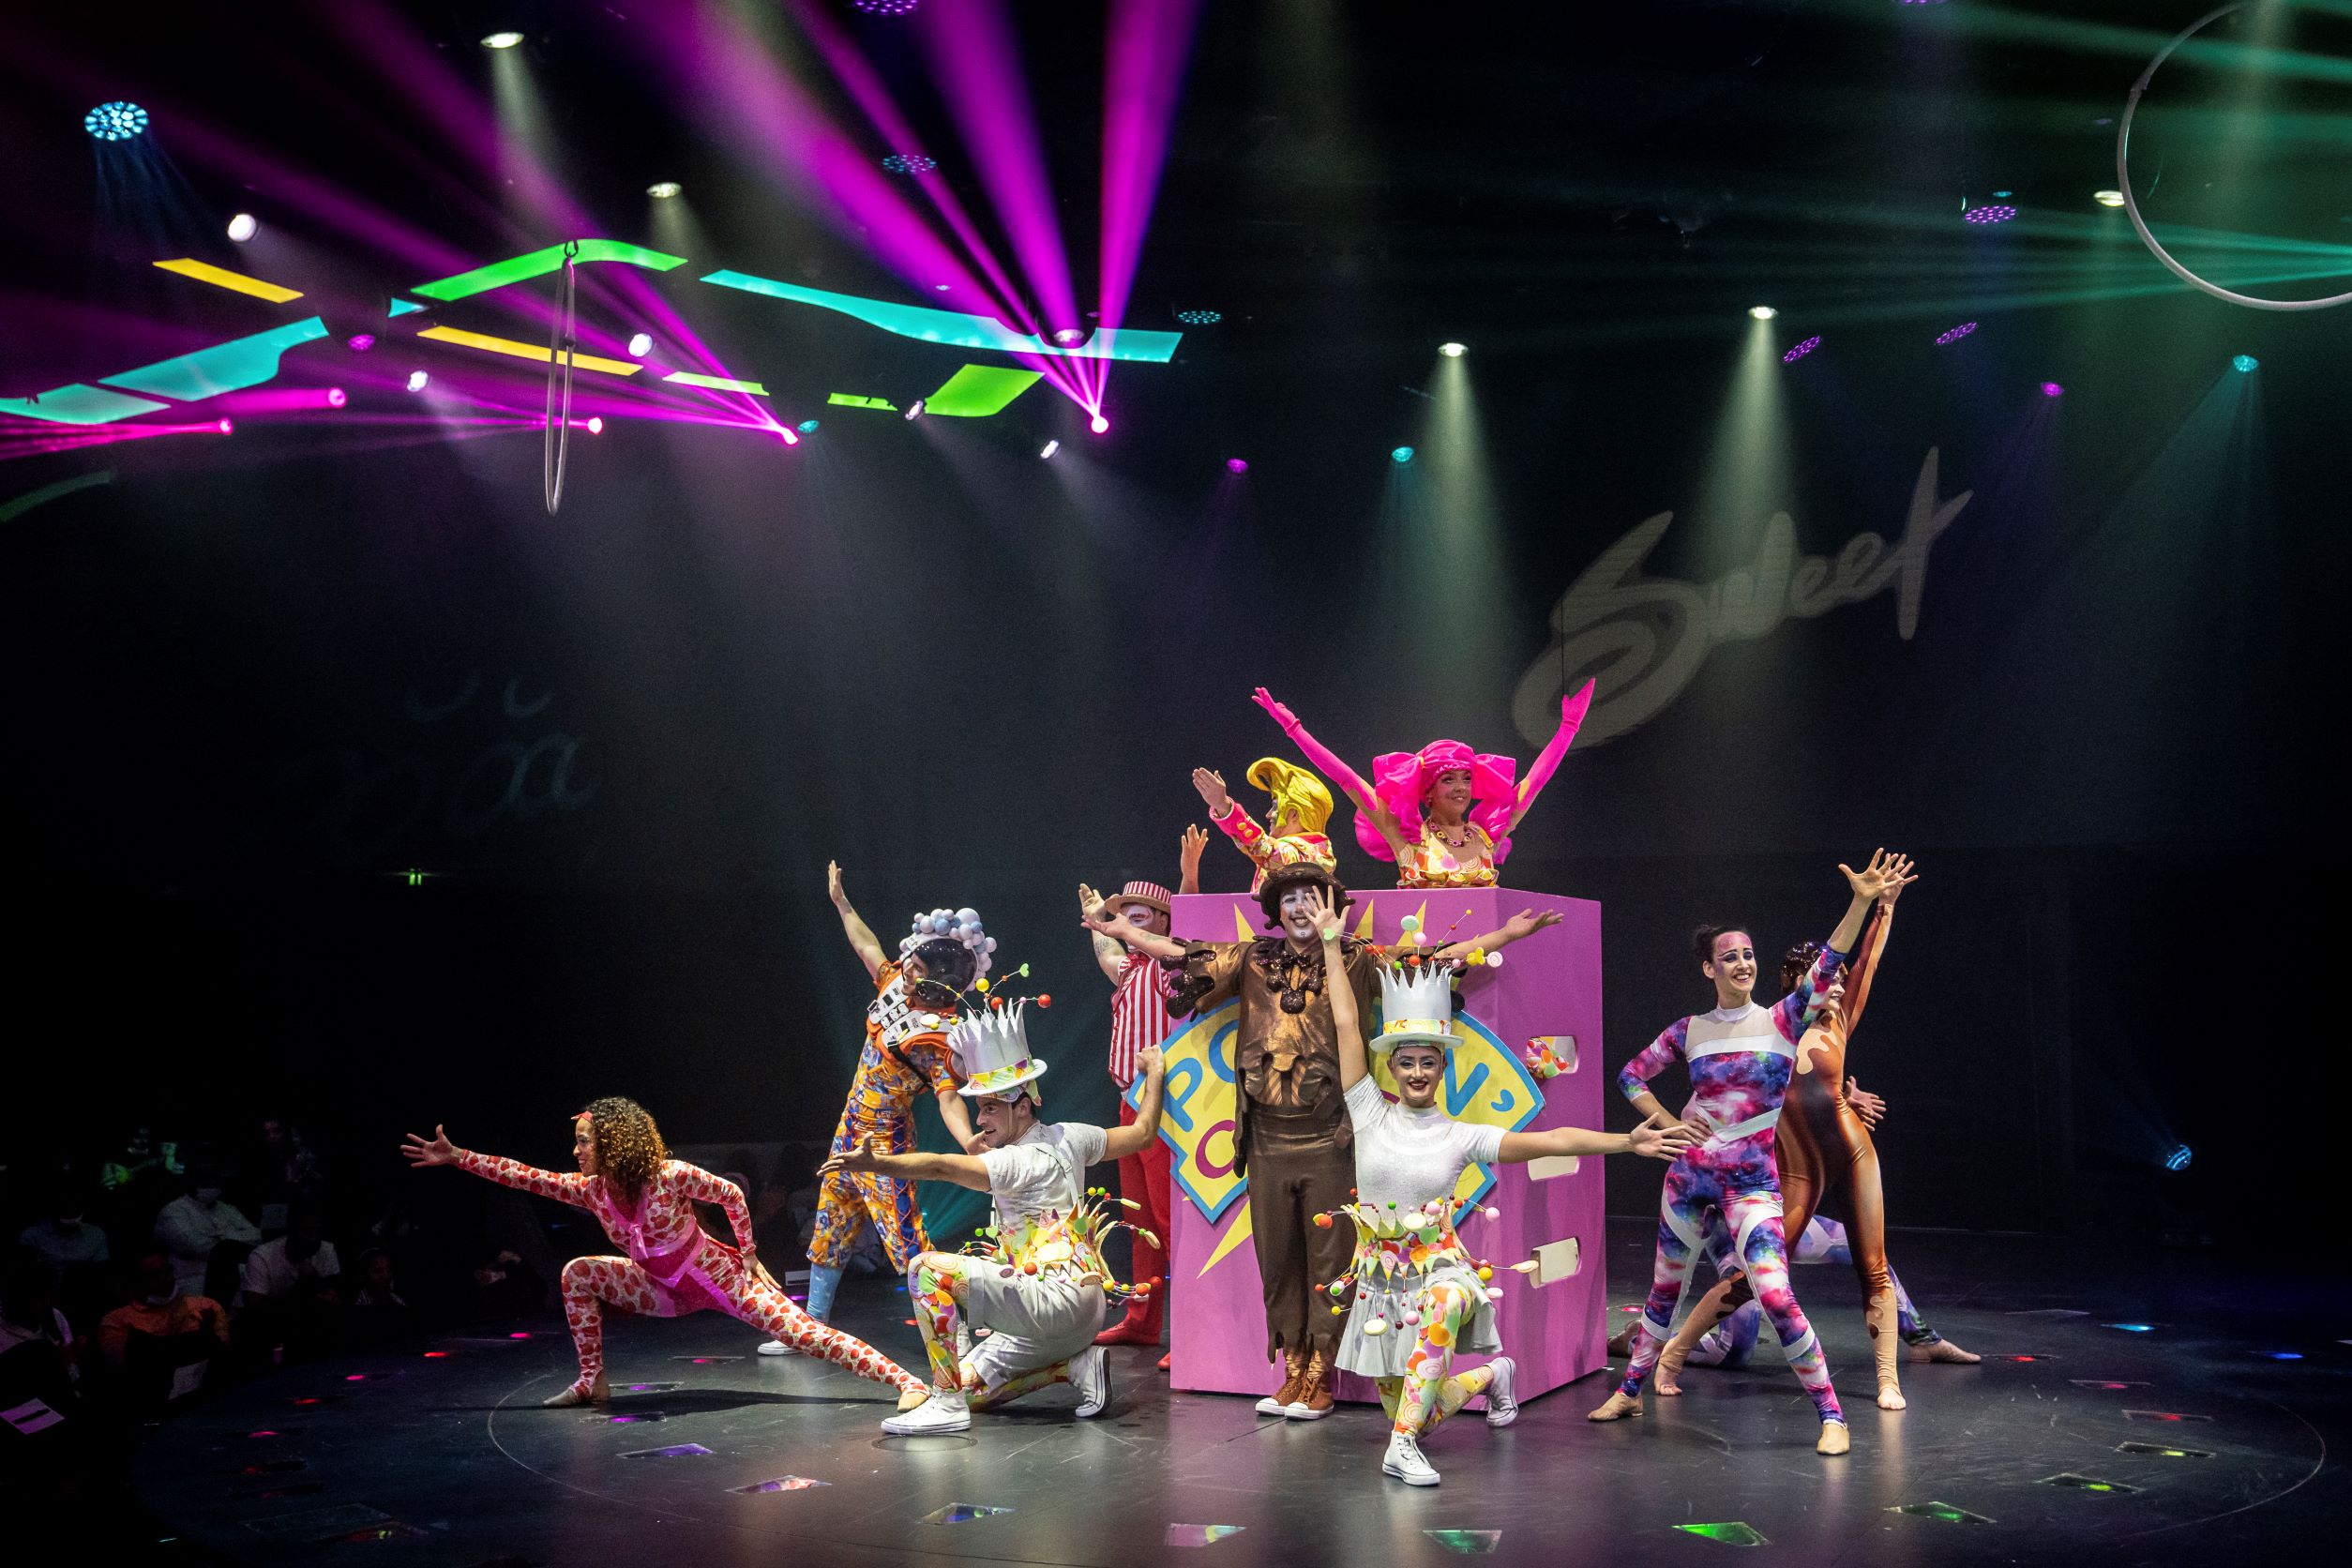 The shows are West End-style as part of MSC's entertainment